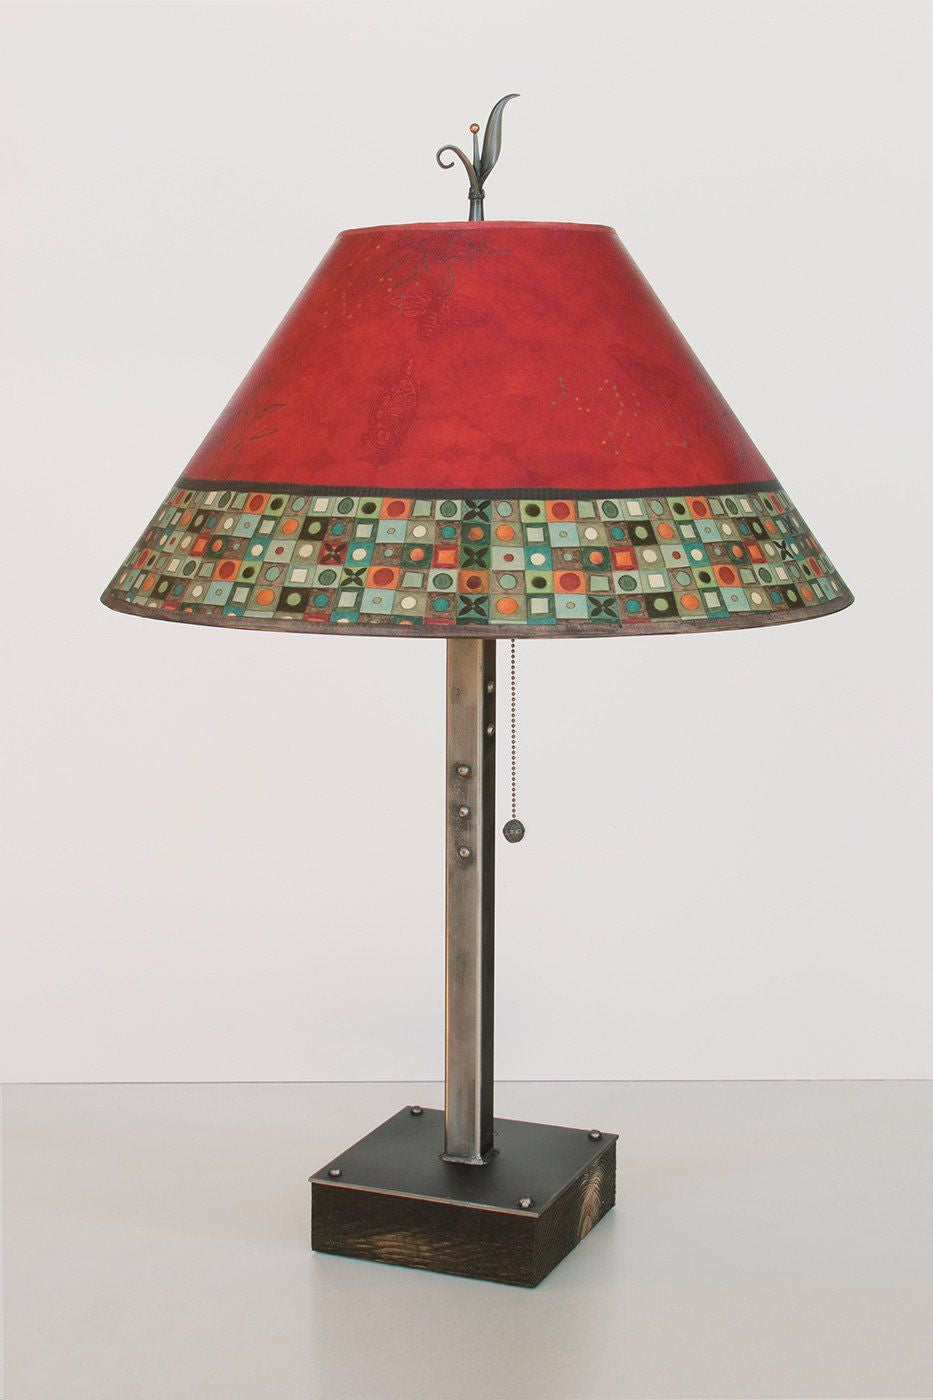 Janna Ugone & Co Table Lamps Steel Table Lamp on Wood with Large Conical Shade in Red Mosaic